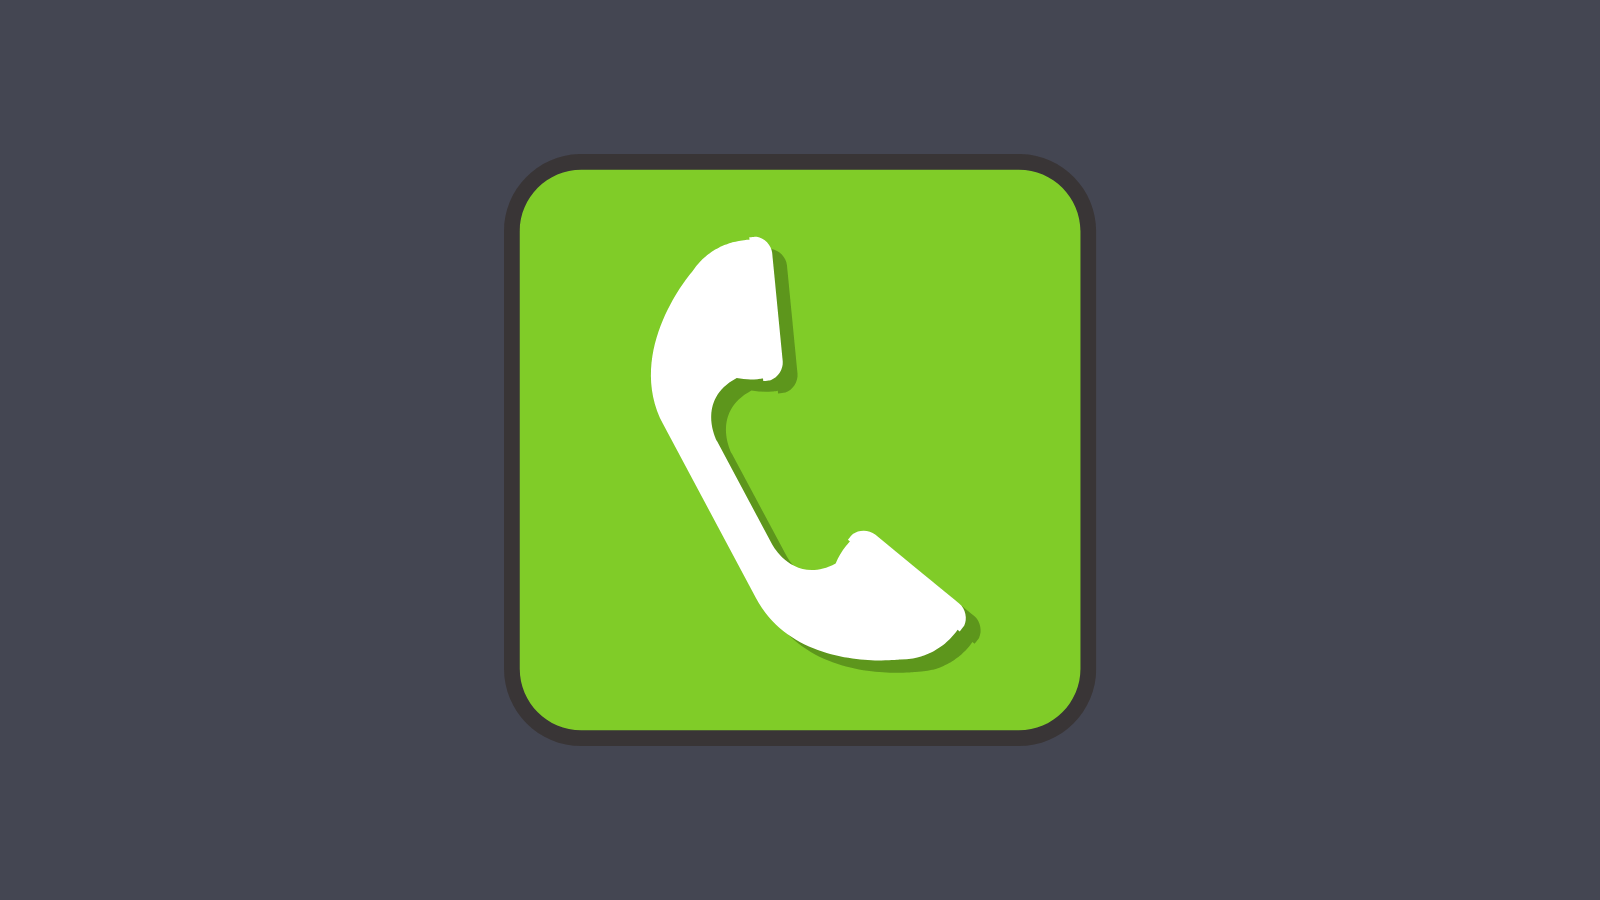 A green phone app icon